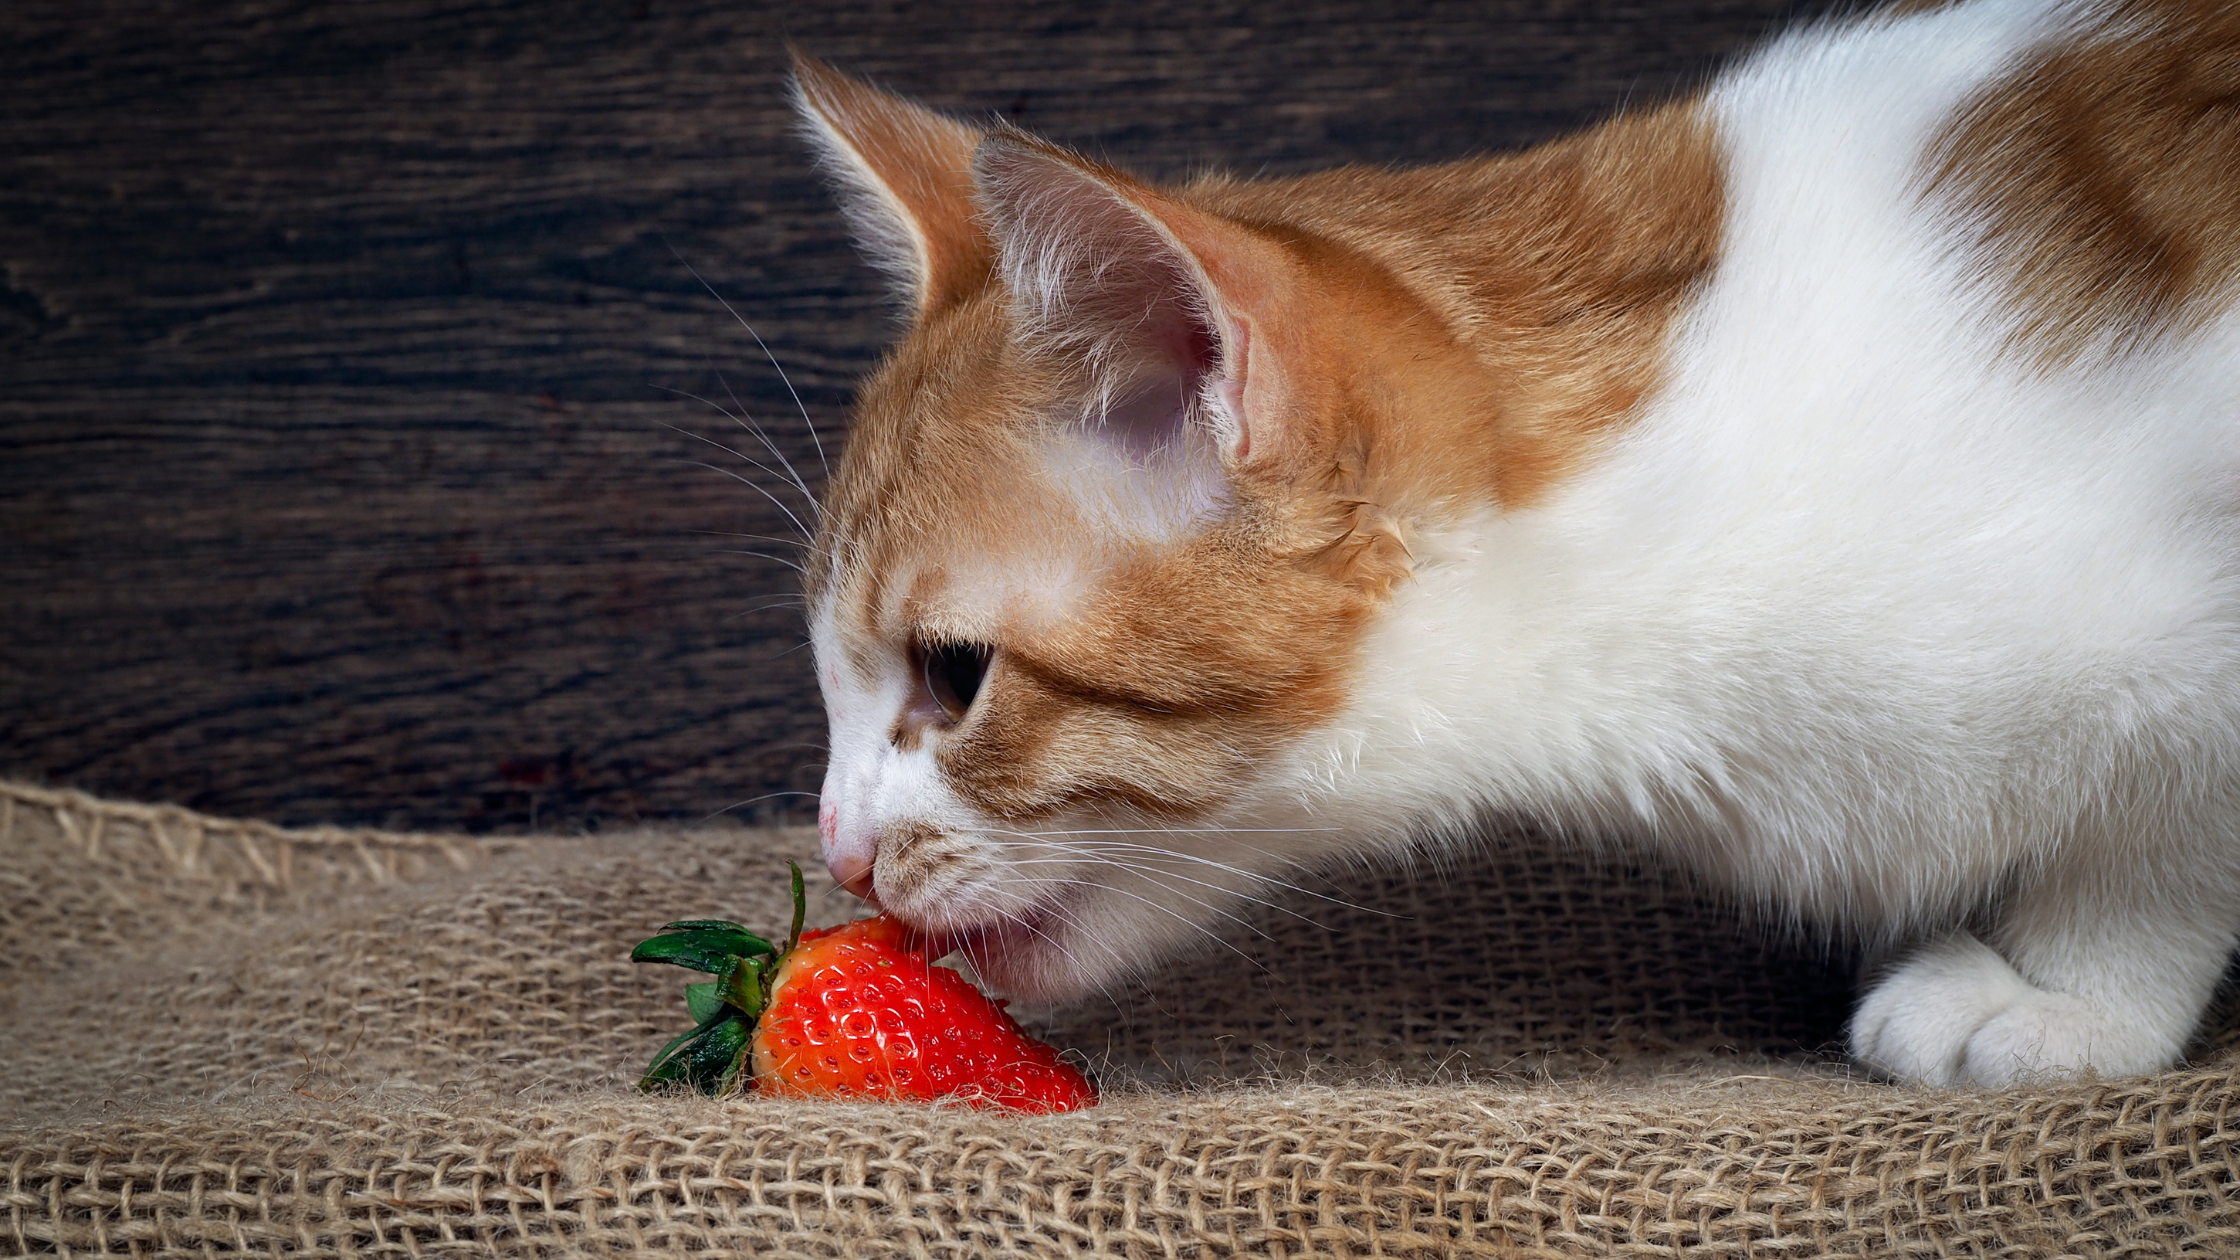 a white and orange cat eating a single strawberry